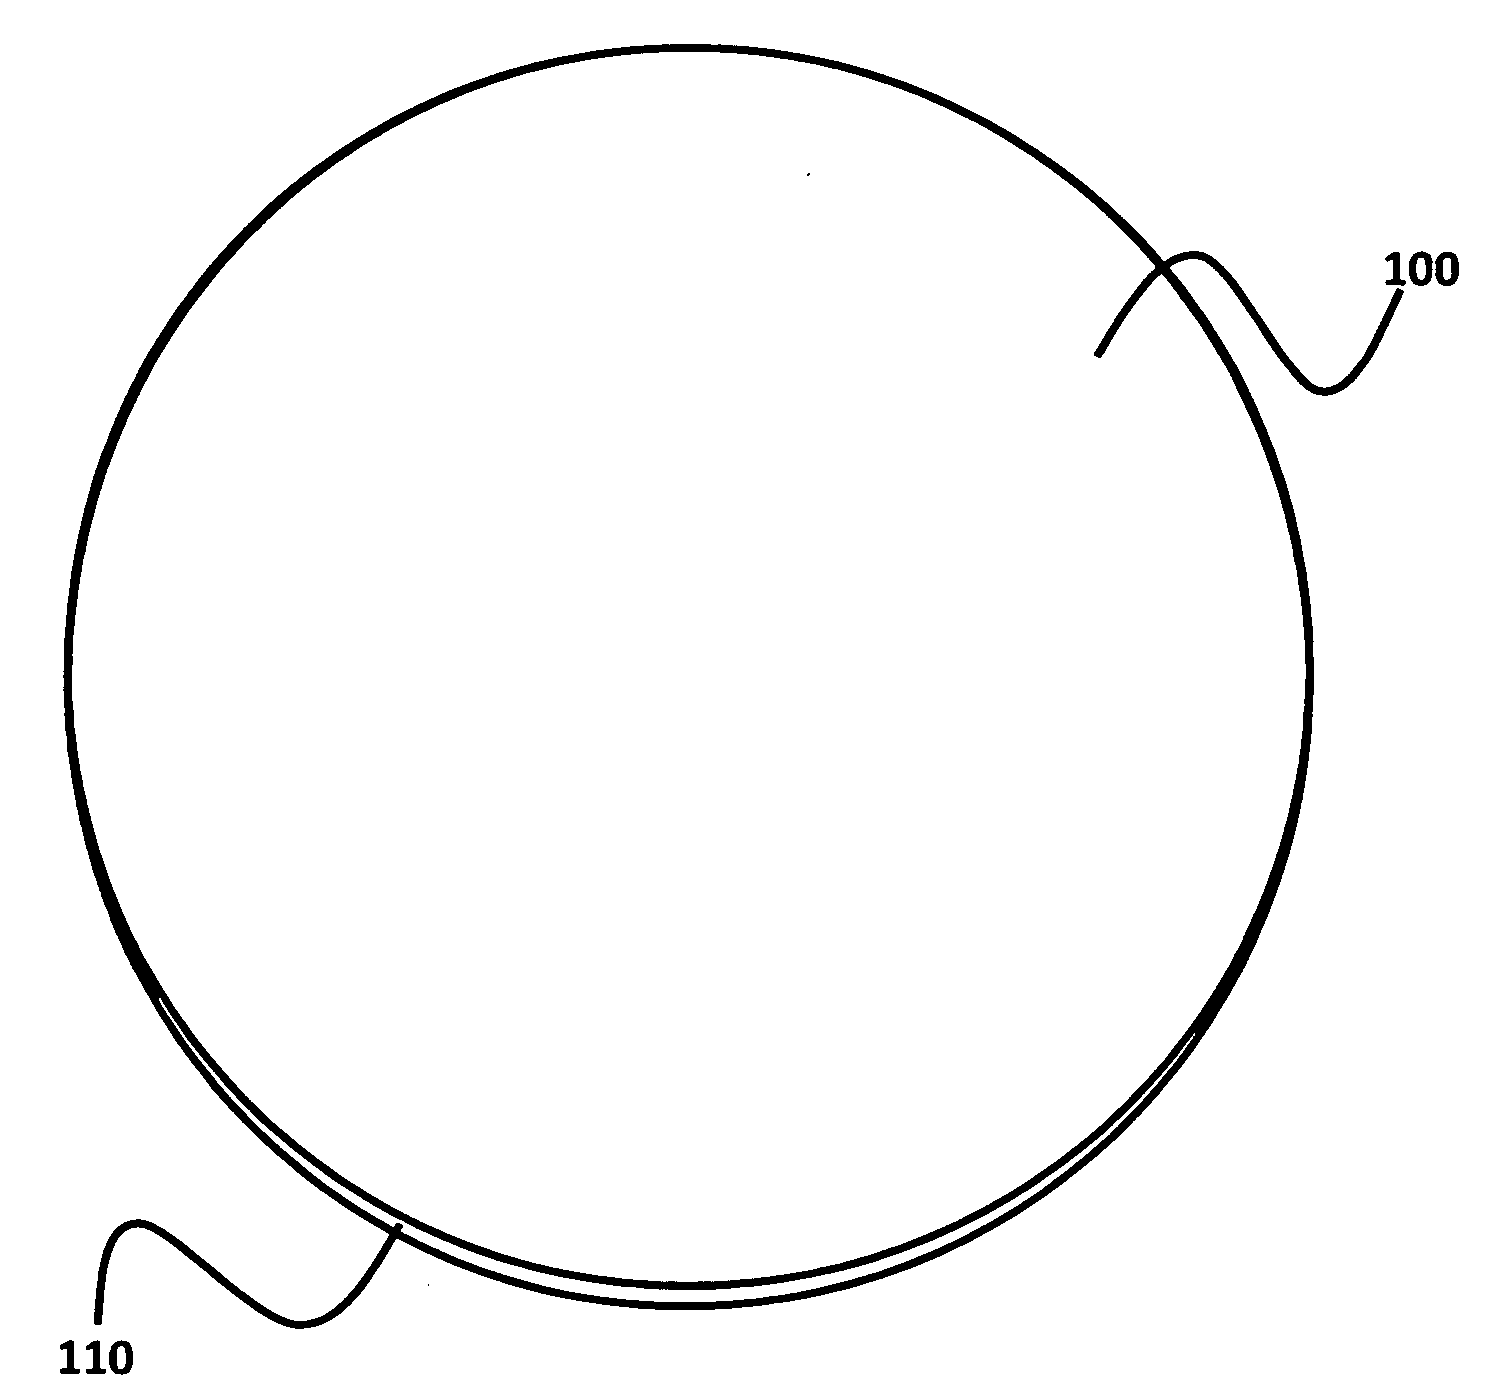 Inflation method for and game ball with noise suppression disk